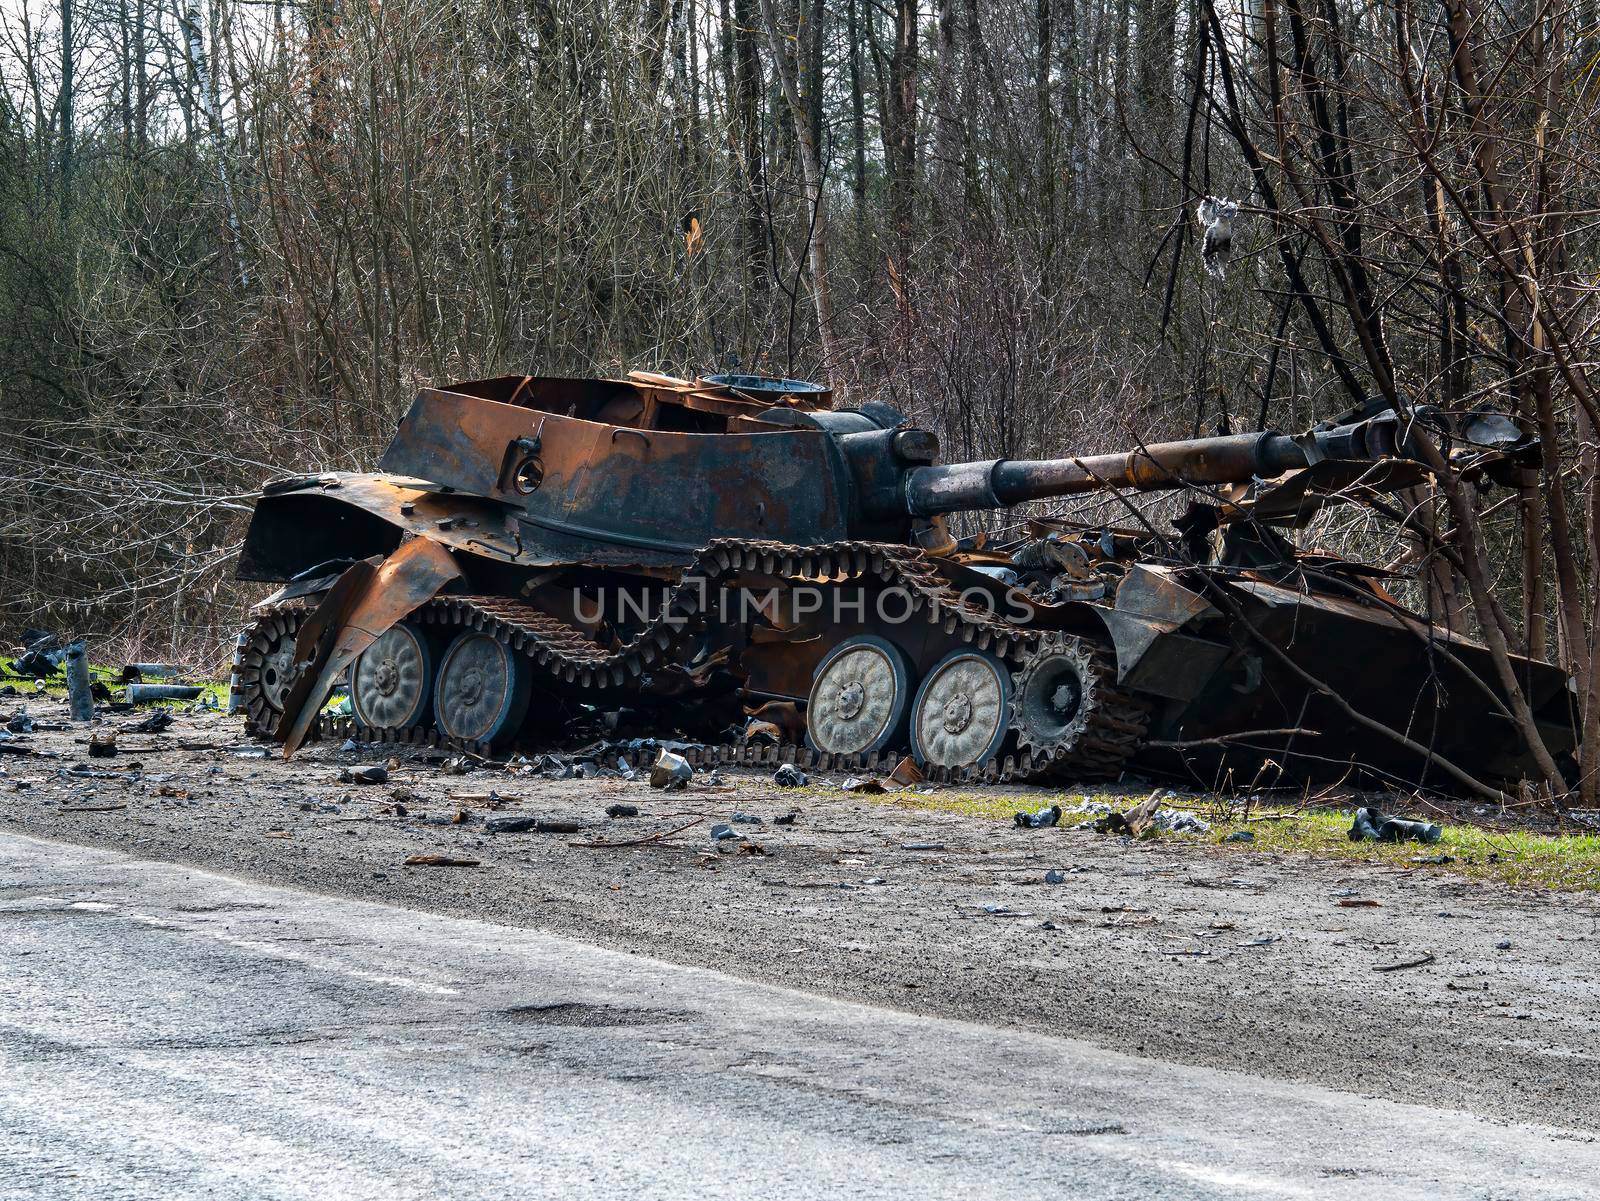 War in Ukraine. Armored vehicles of the Russian army on the streets of Ukraine. Military tanks and self-propelled artillery mounts. Russian military equipment knocked out by the Ukrainian army.